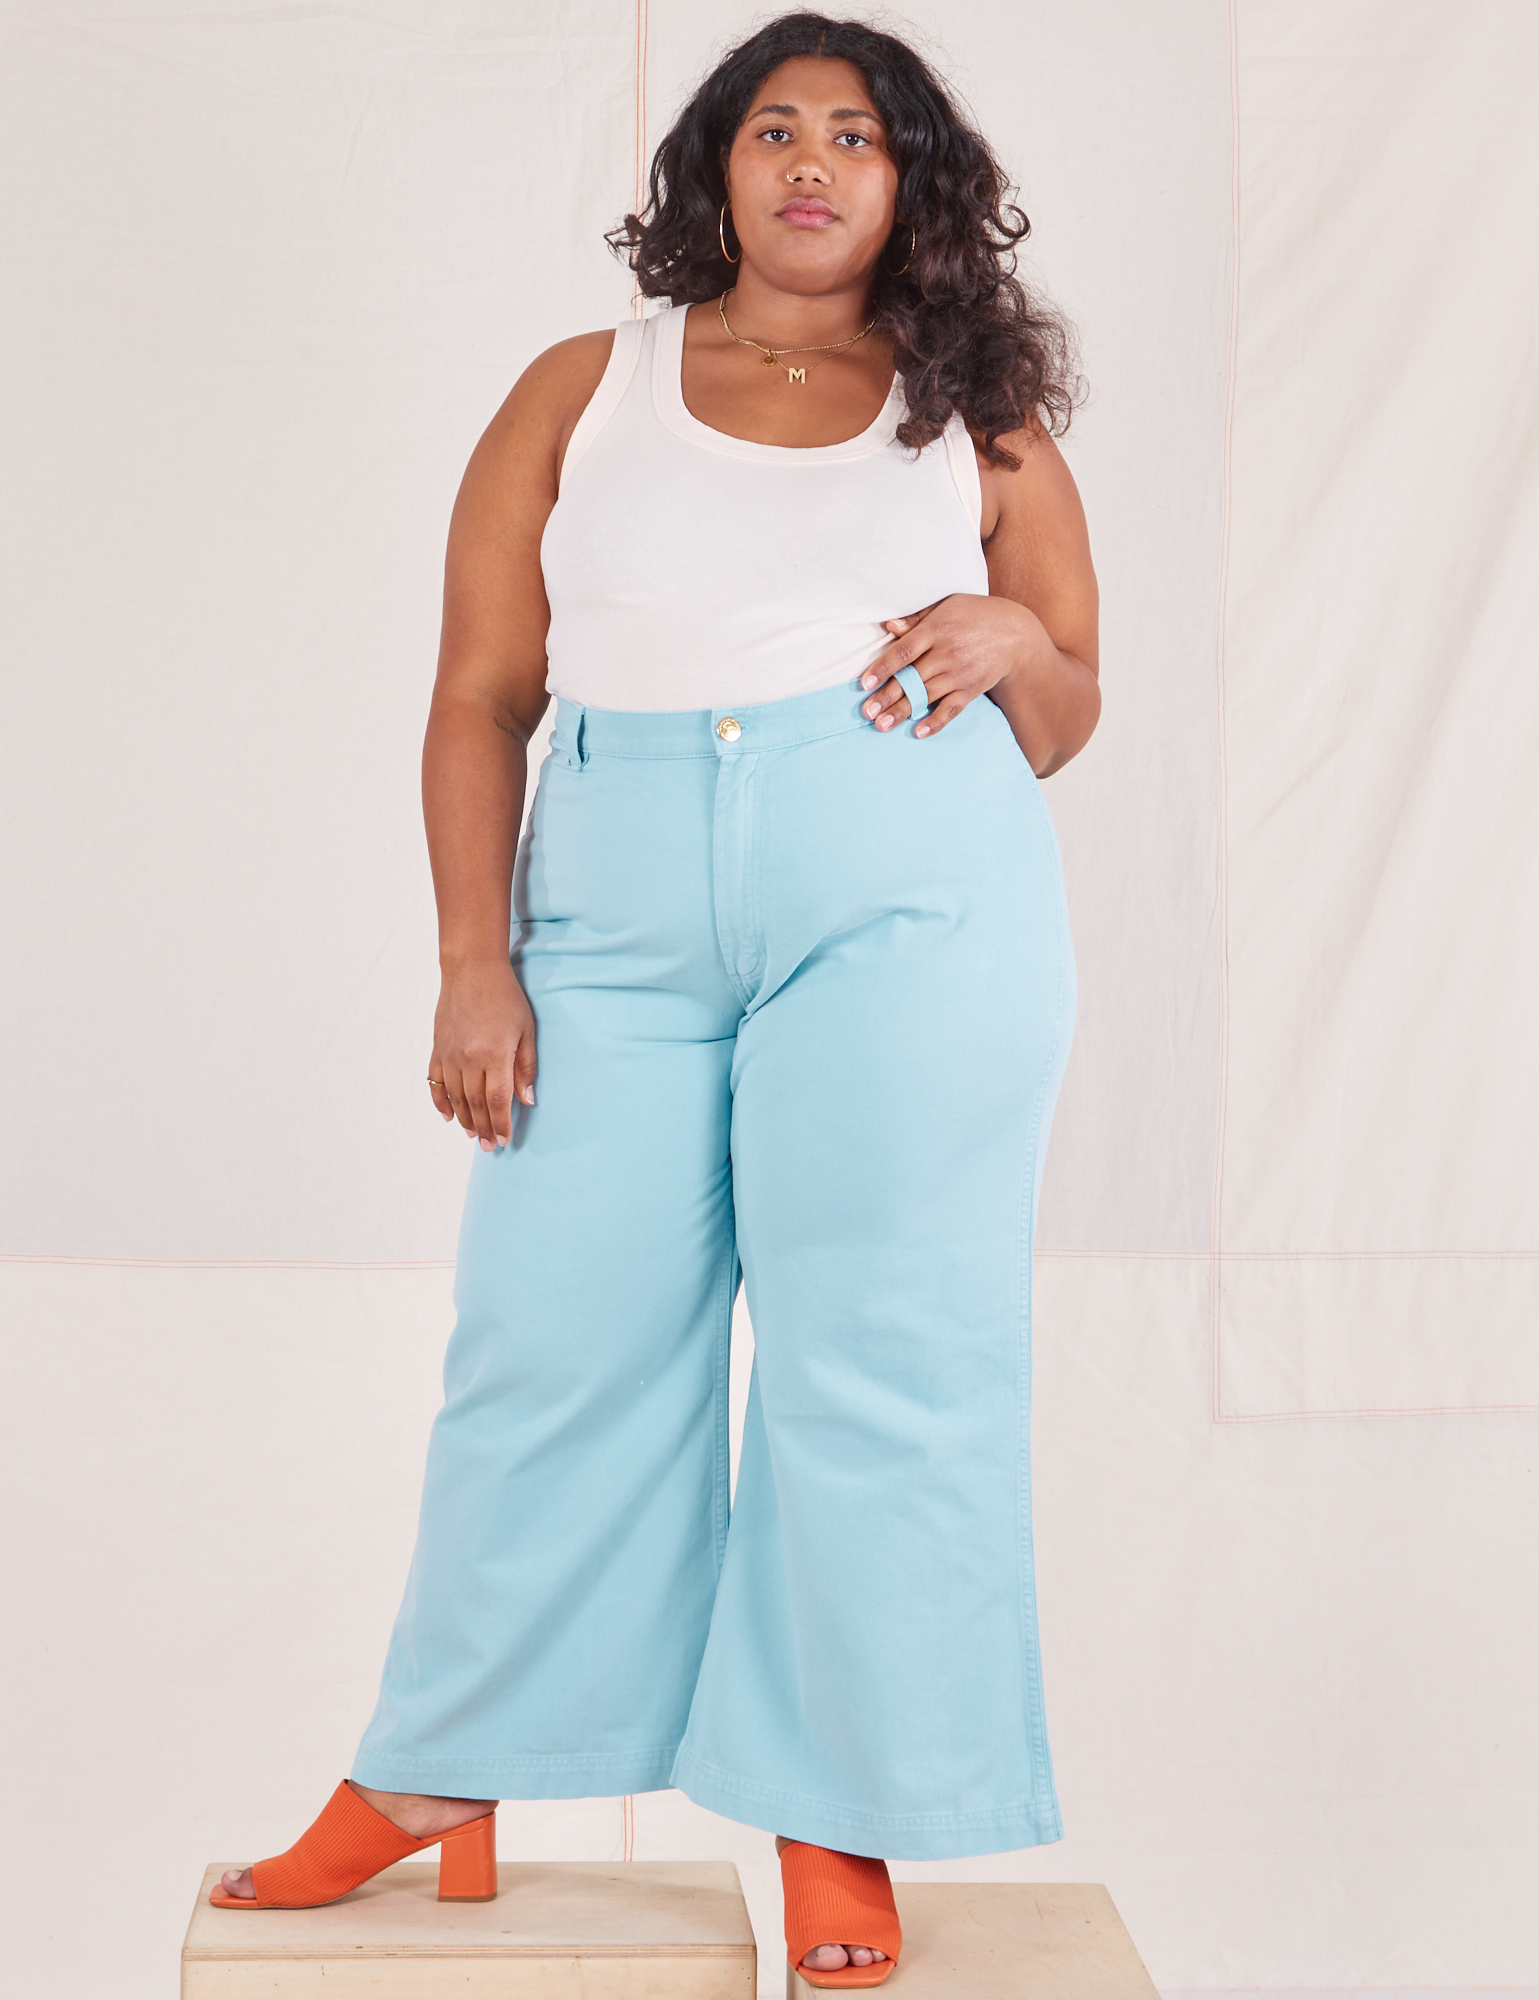 Morgan is 5&#39;5&quot; and wearing 1XL Bell Bottoms in Baby Blue paired with vintage off-white Tank Top